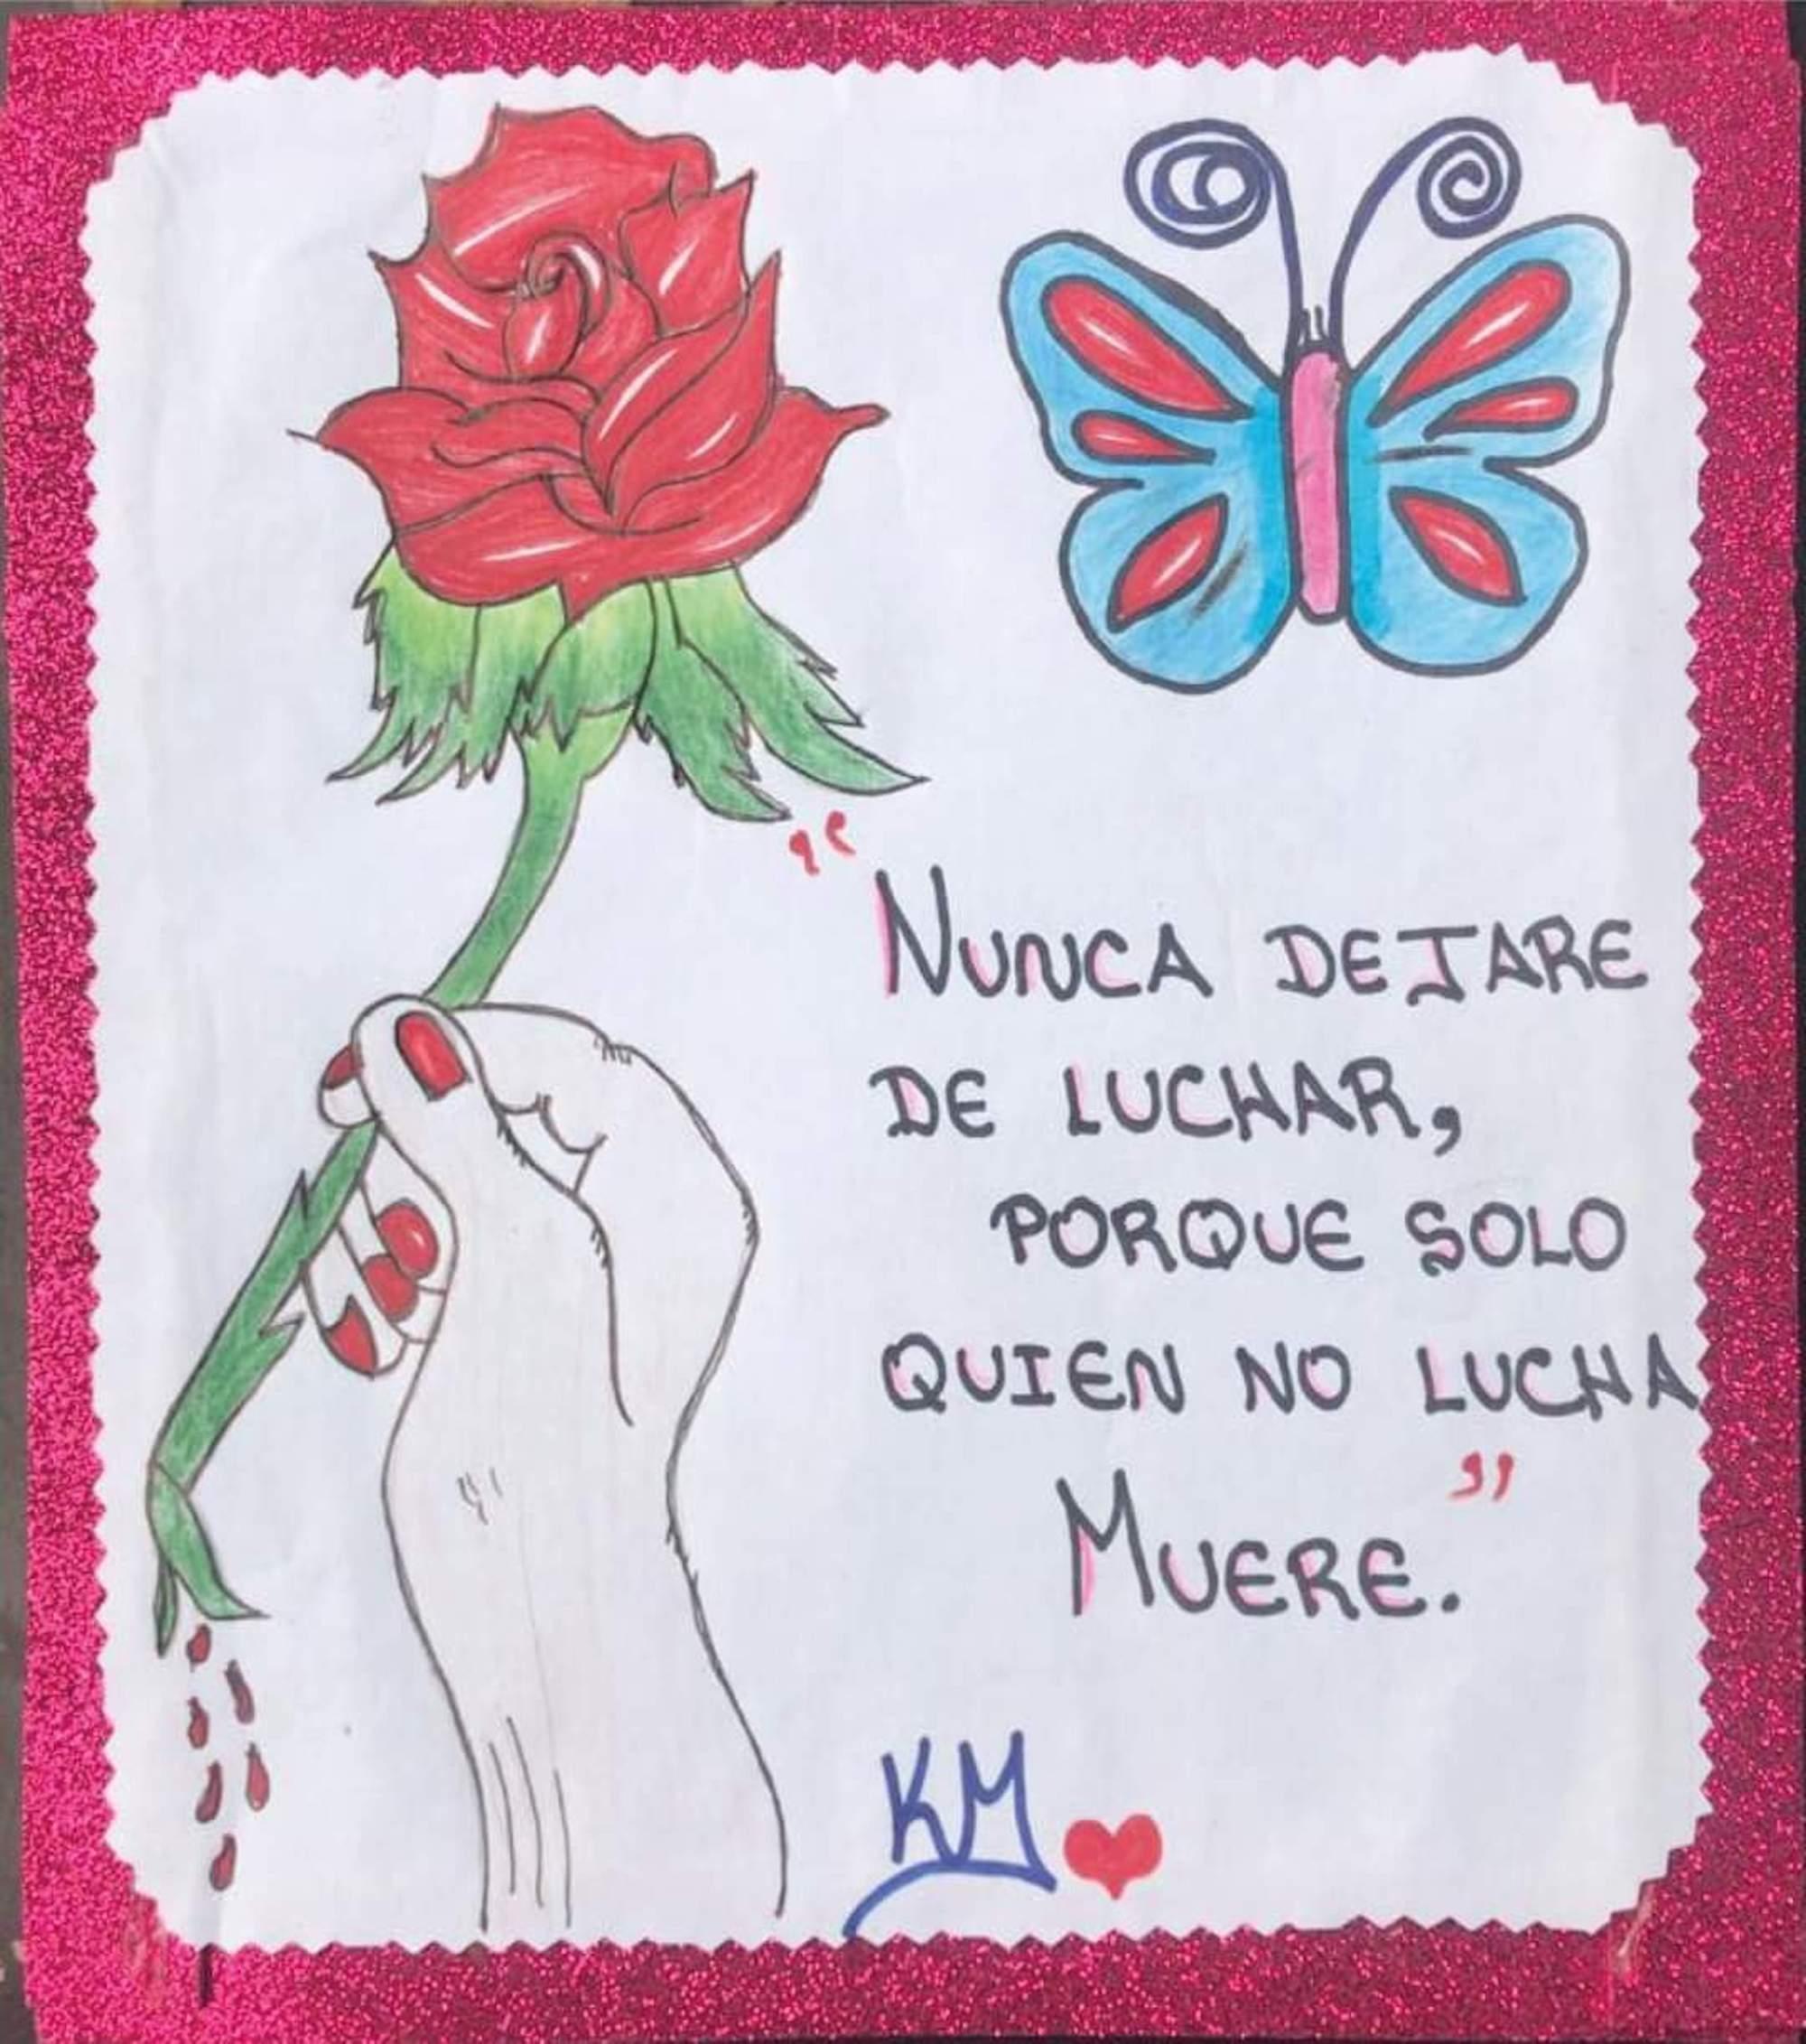 Martínez hung this drawing from one of the doors in her home in La Esperanza, Intibucá. Following her death, the message has become a rallying cry for her family. “I’ll never stop fighting because those who don’t fight die.” Courtesy of the Rodríguez-Sosa